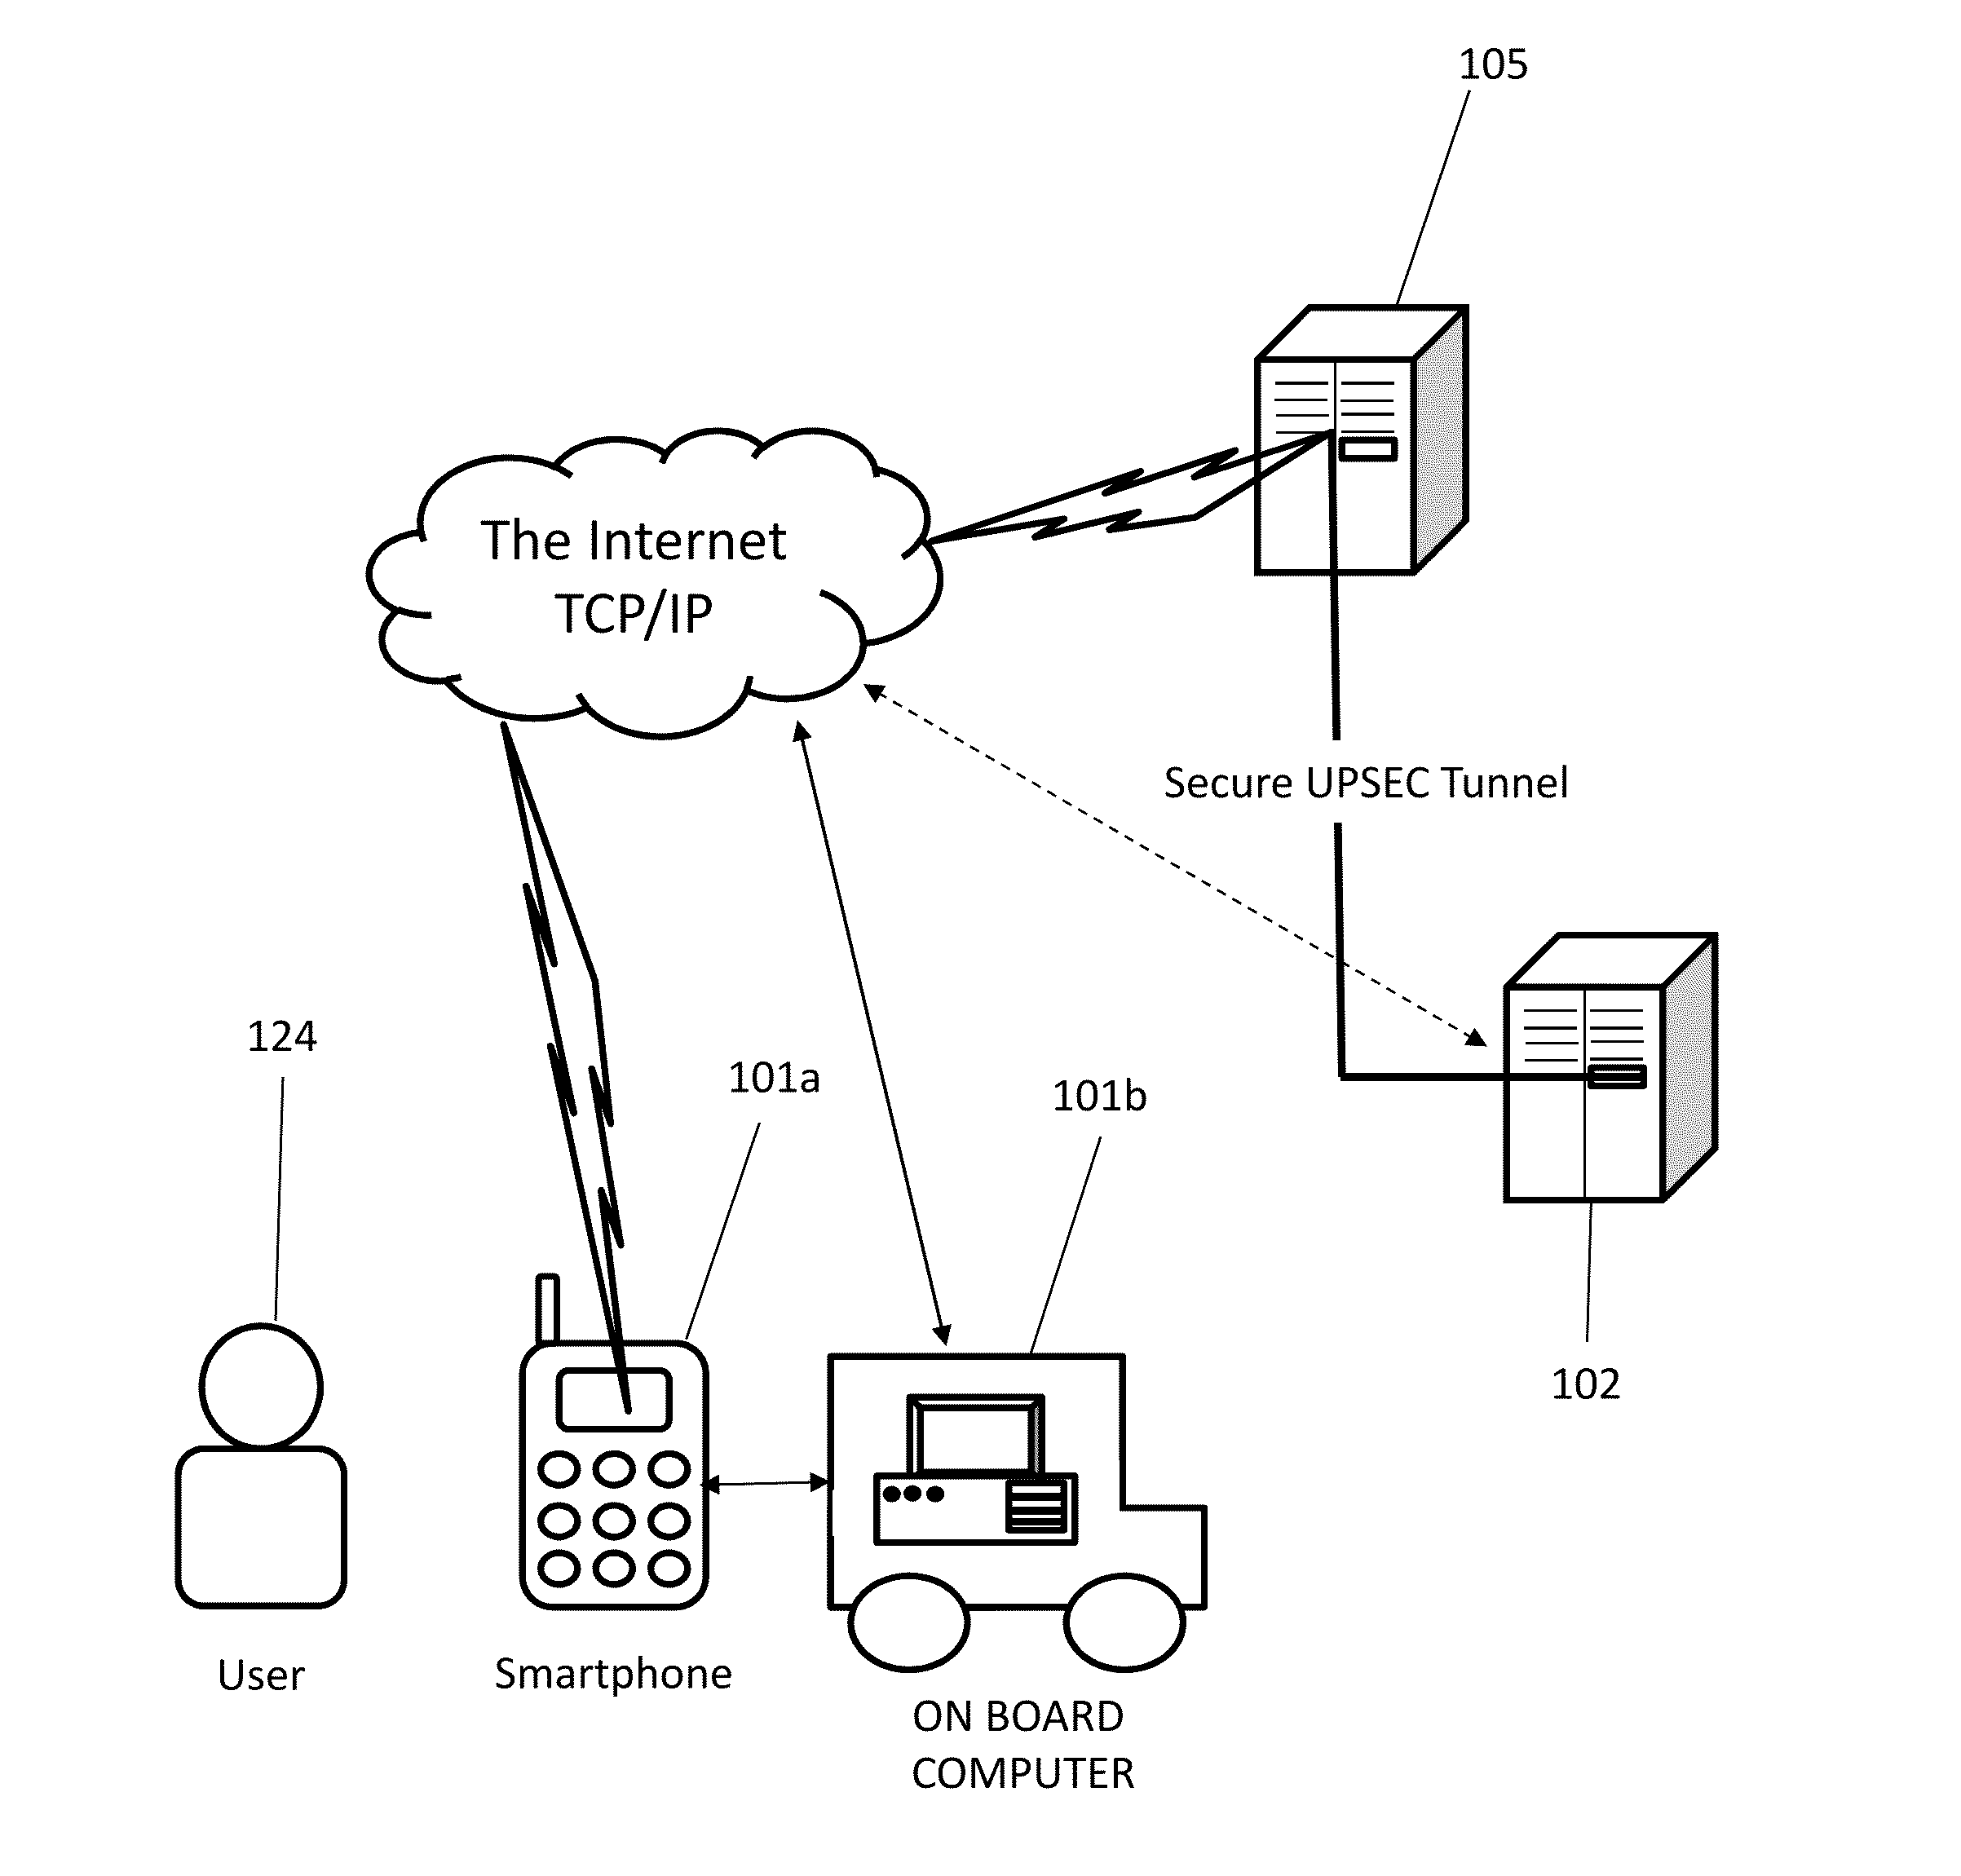 System and method for facilitating user access to vehicles based on biometric information